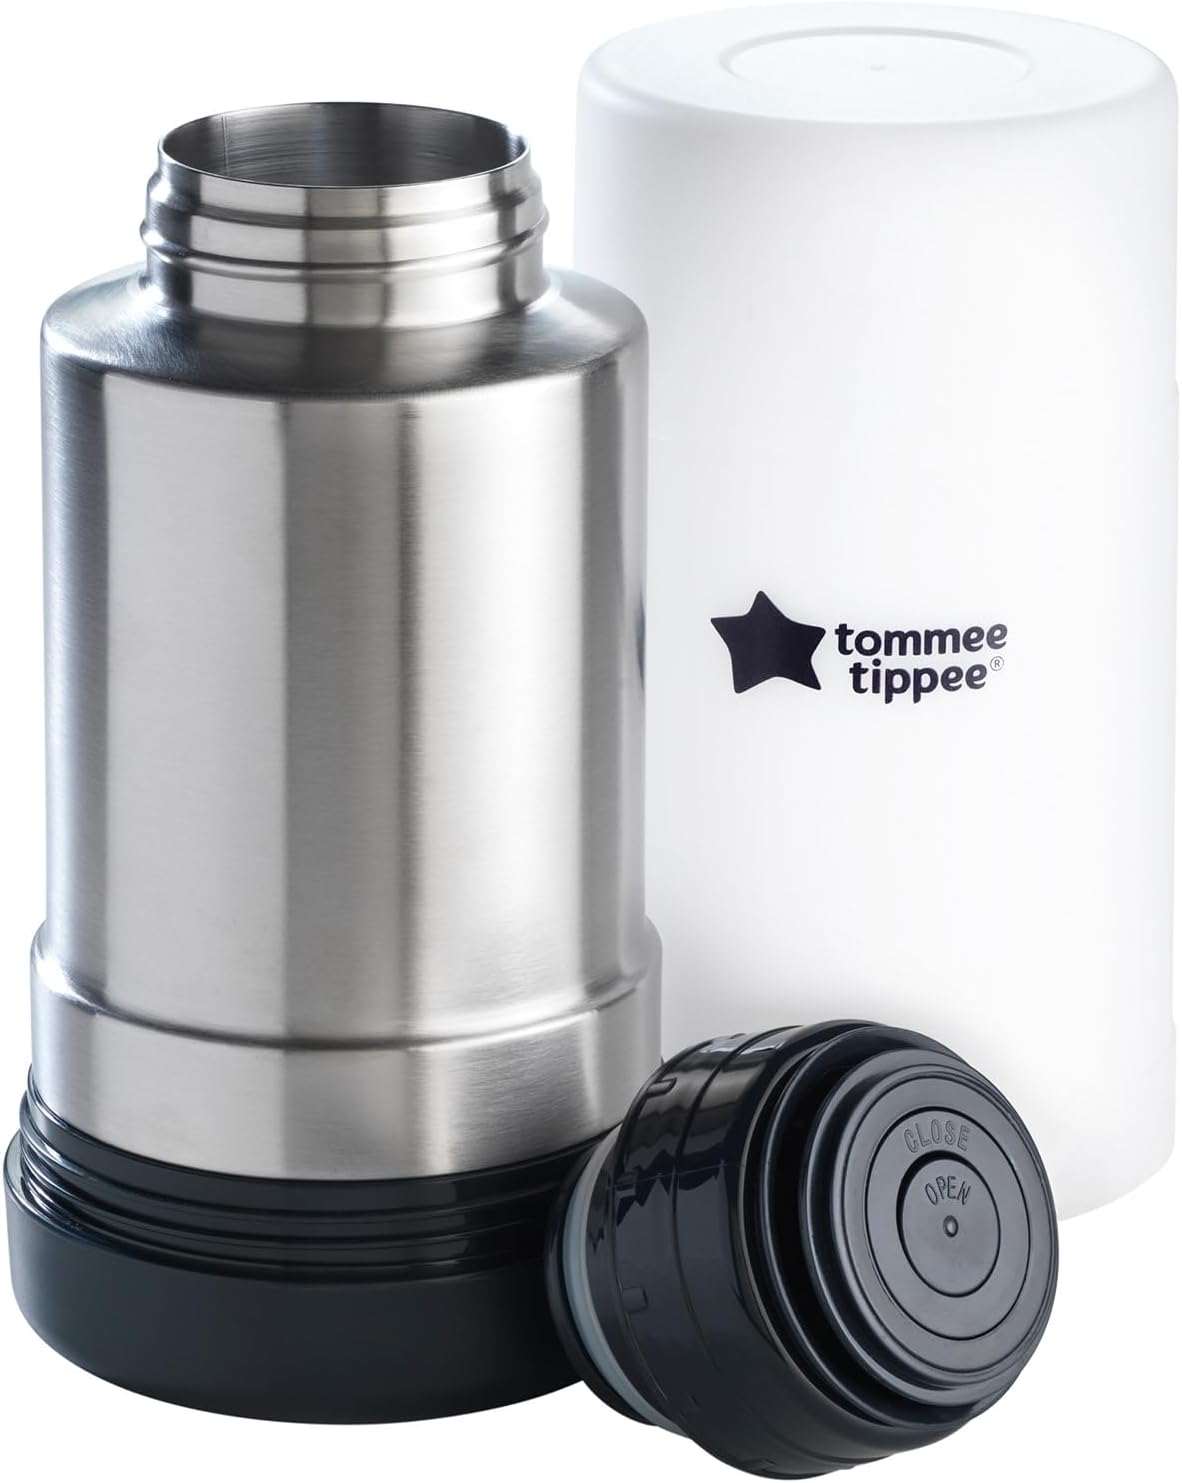 Tommee Tippee TT423000 Closer To Nature Travel Bottle & Food Warmer